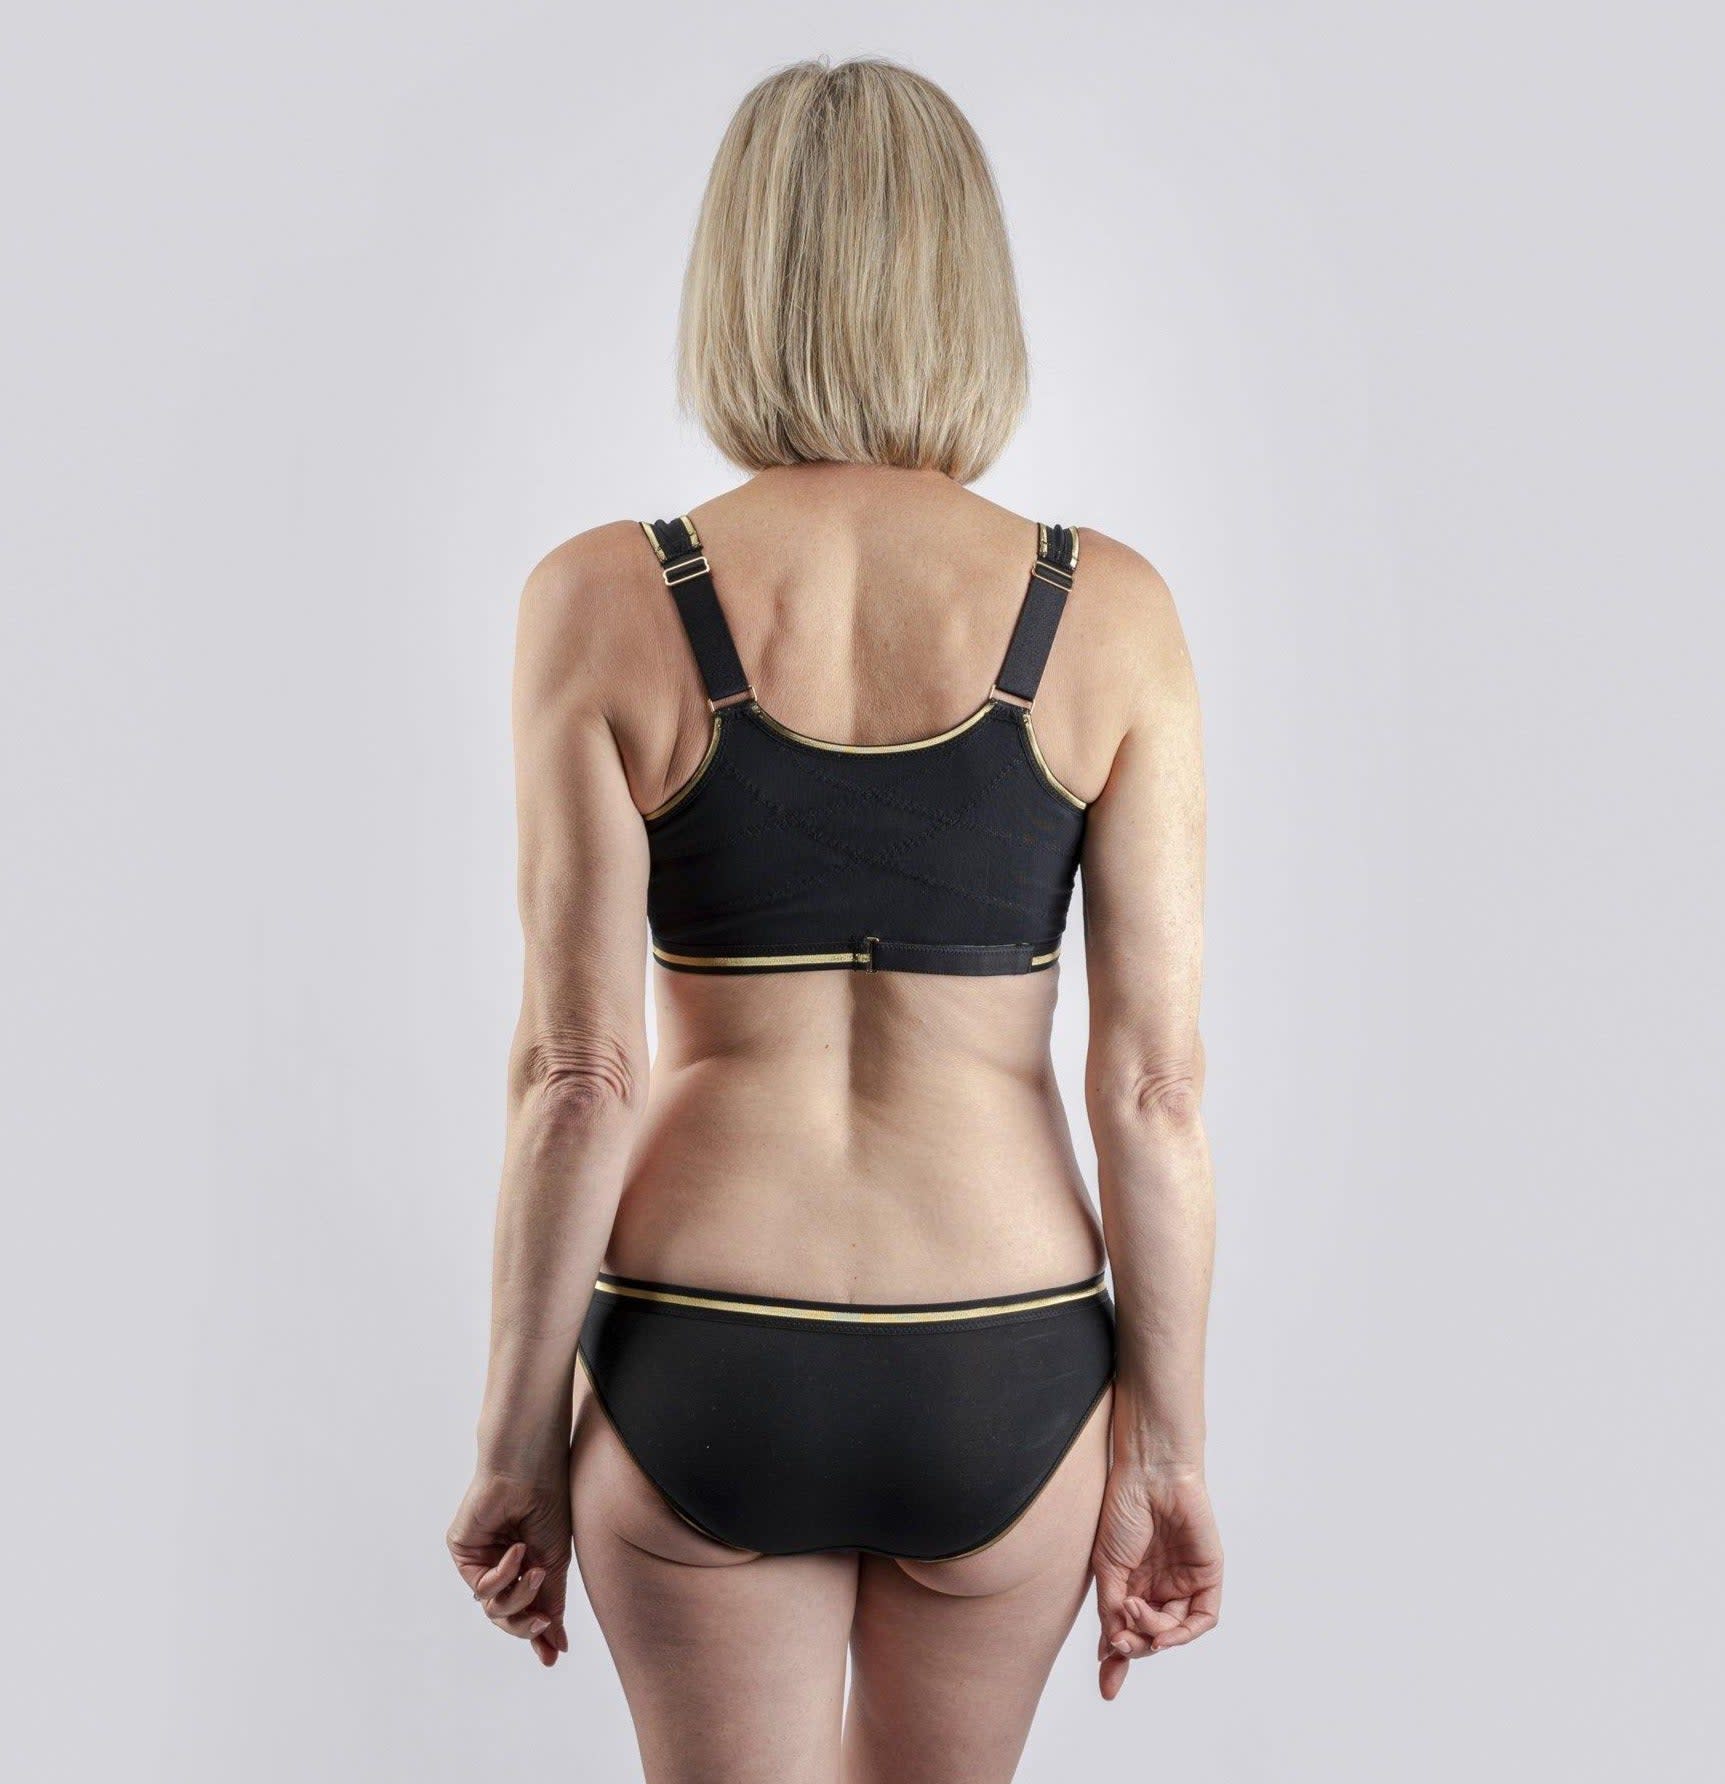 Back Support Full Coverage Wireless Organic Cotton Bra Black, Juliemay  Lingerie